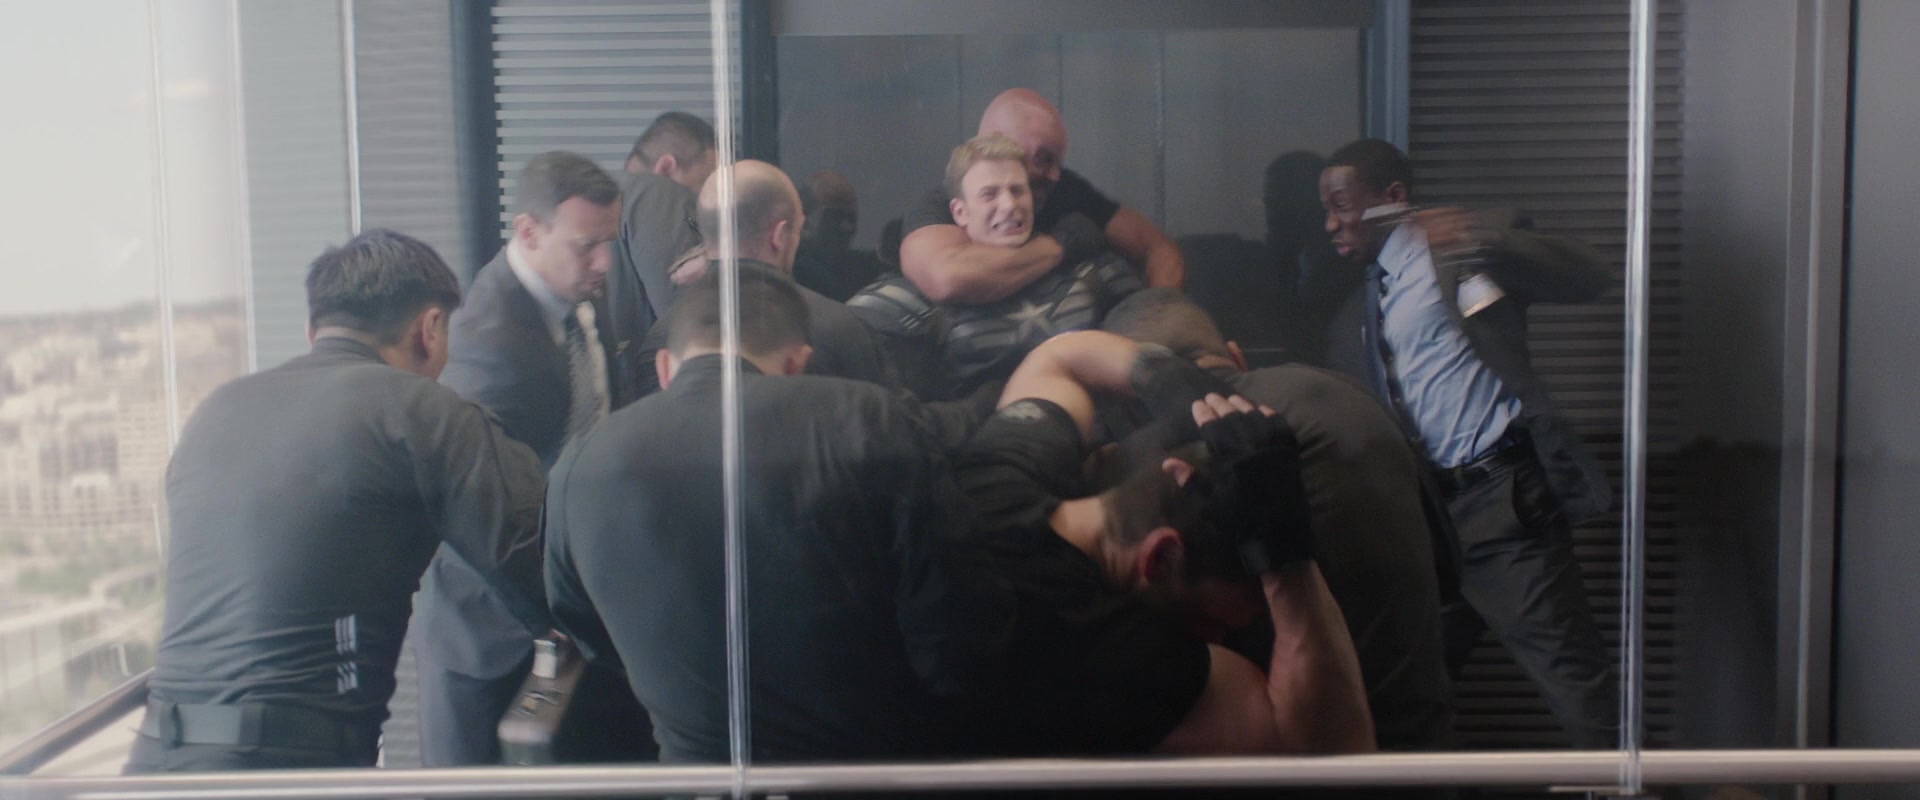 Steve Rogers (Chris Evans) is accosted by Hydra's sleeper agents within S.H.I.E.L.D. in Captain America: The Winter Soldier (2014), Marvel Entertainment